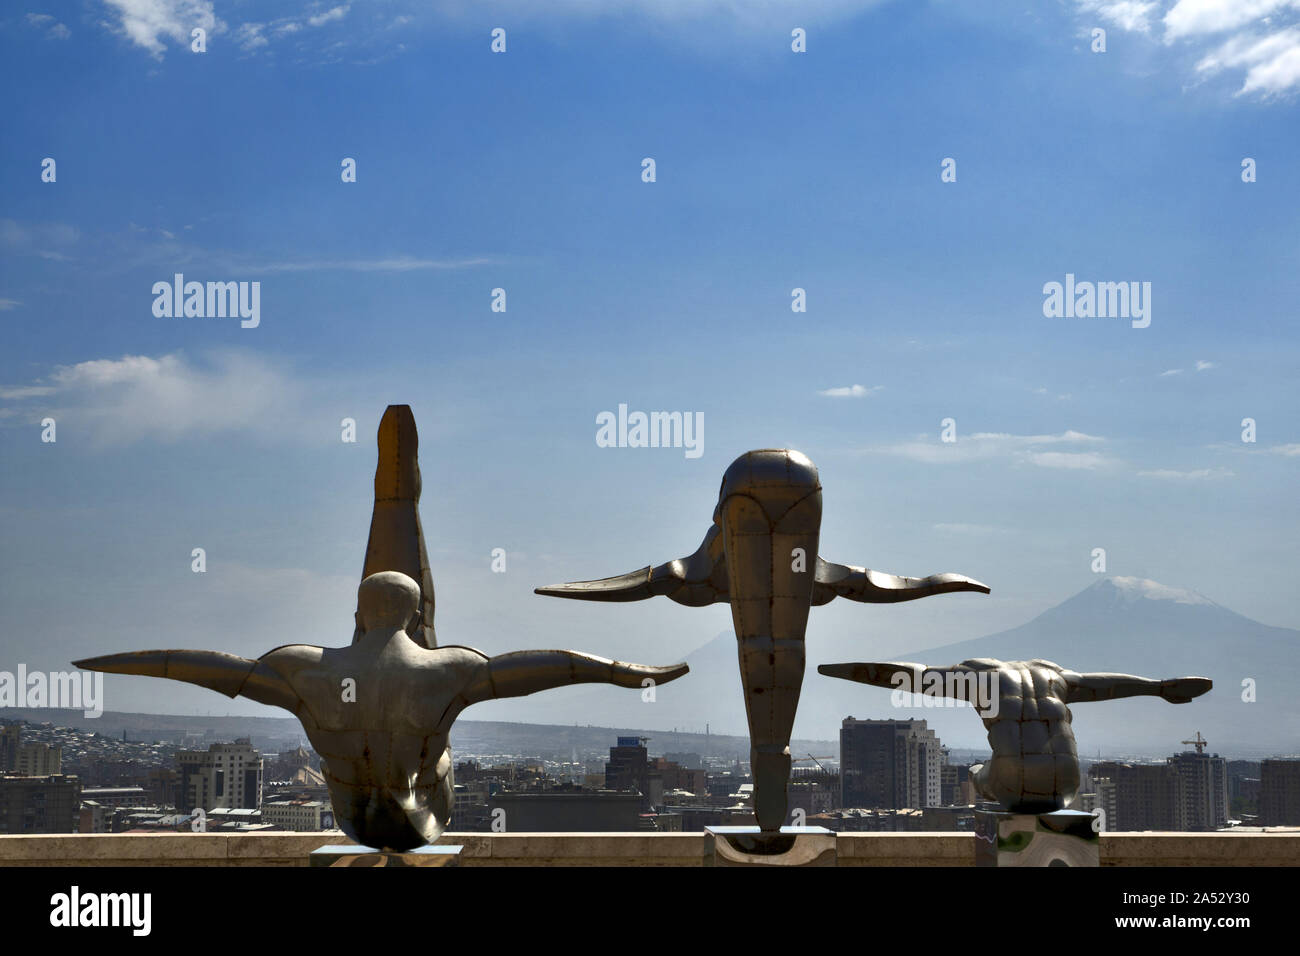 Erevan/Yerevan, Armenia: Cafesjian Center for the Arts II (Cascade Complex), Three gymnasts with Mount Ararat in the background Stock Photo